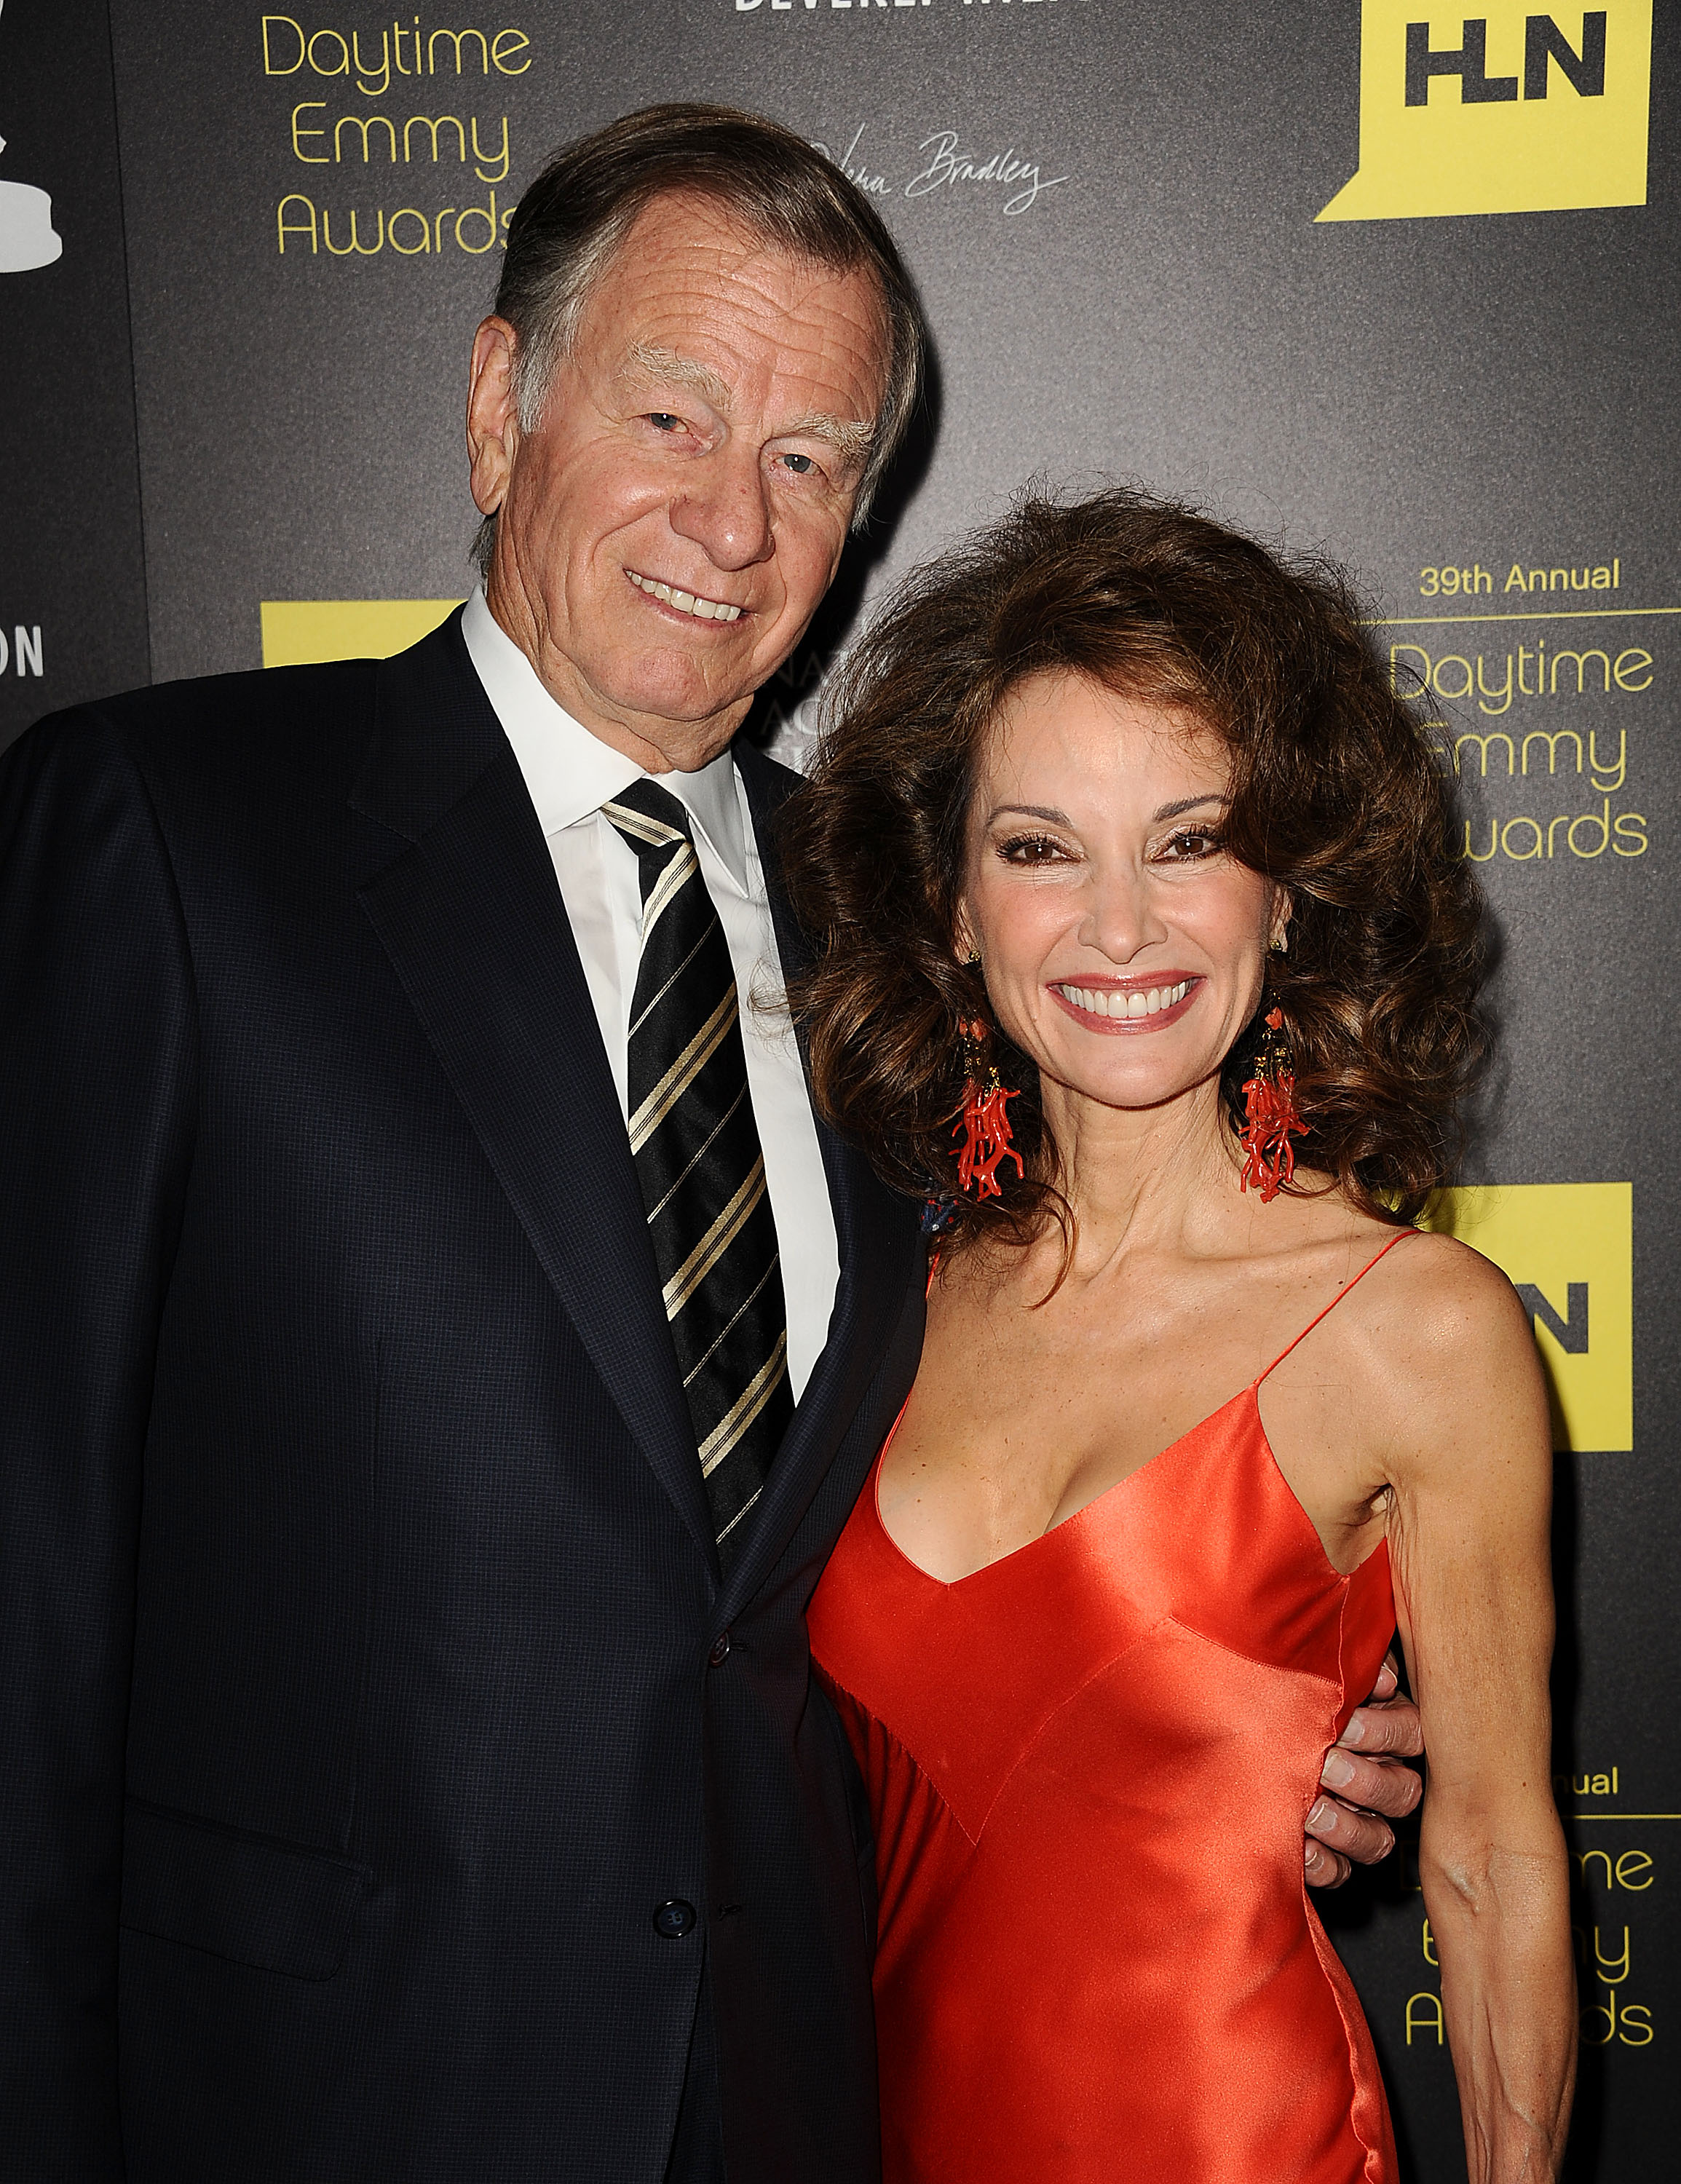 Actress Susan Lucci (R) and husband Helmut Huber at the 39th annual Daytime Emmy Awards at The Beverly Hilton Hotel on June 23, 2012 in Beverly Hills, California | Source: Getty Images